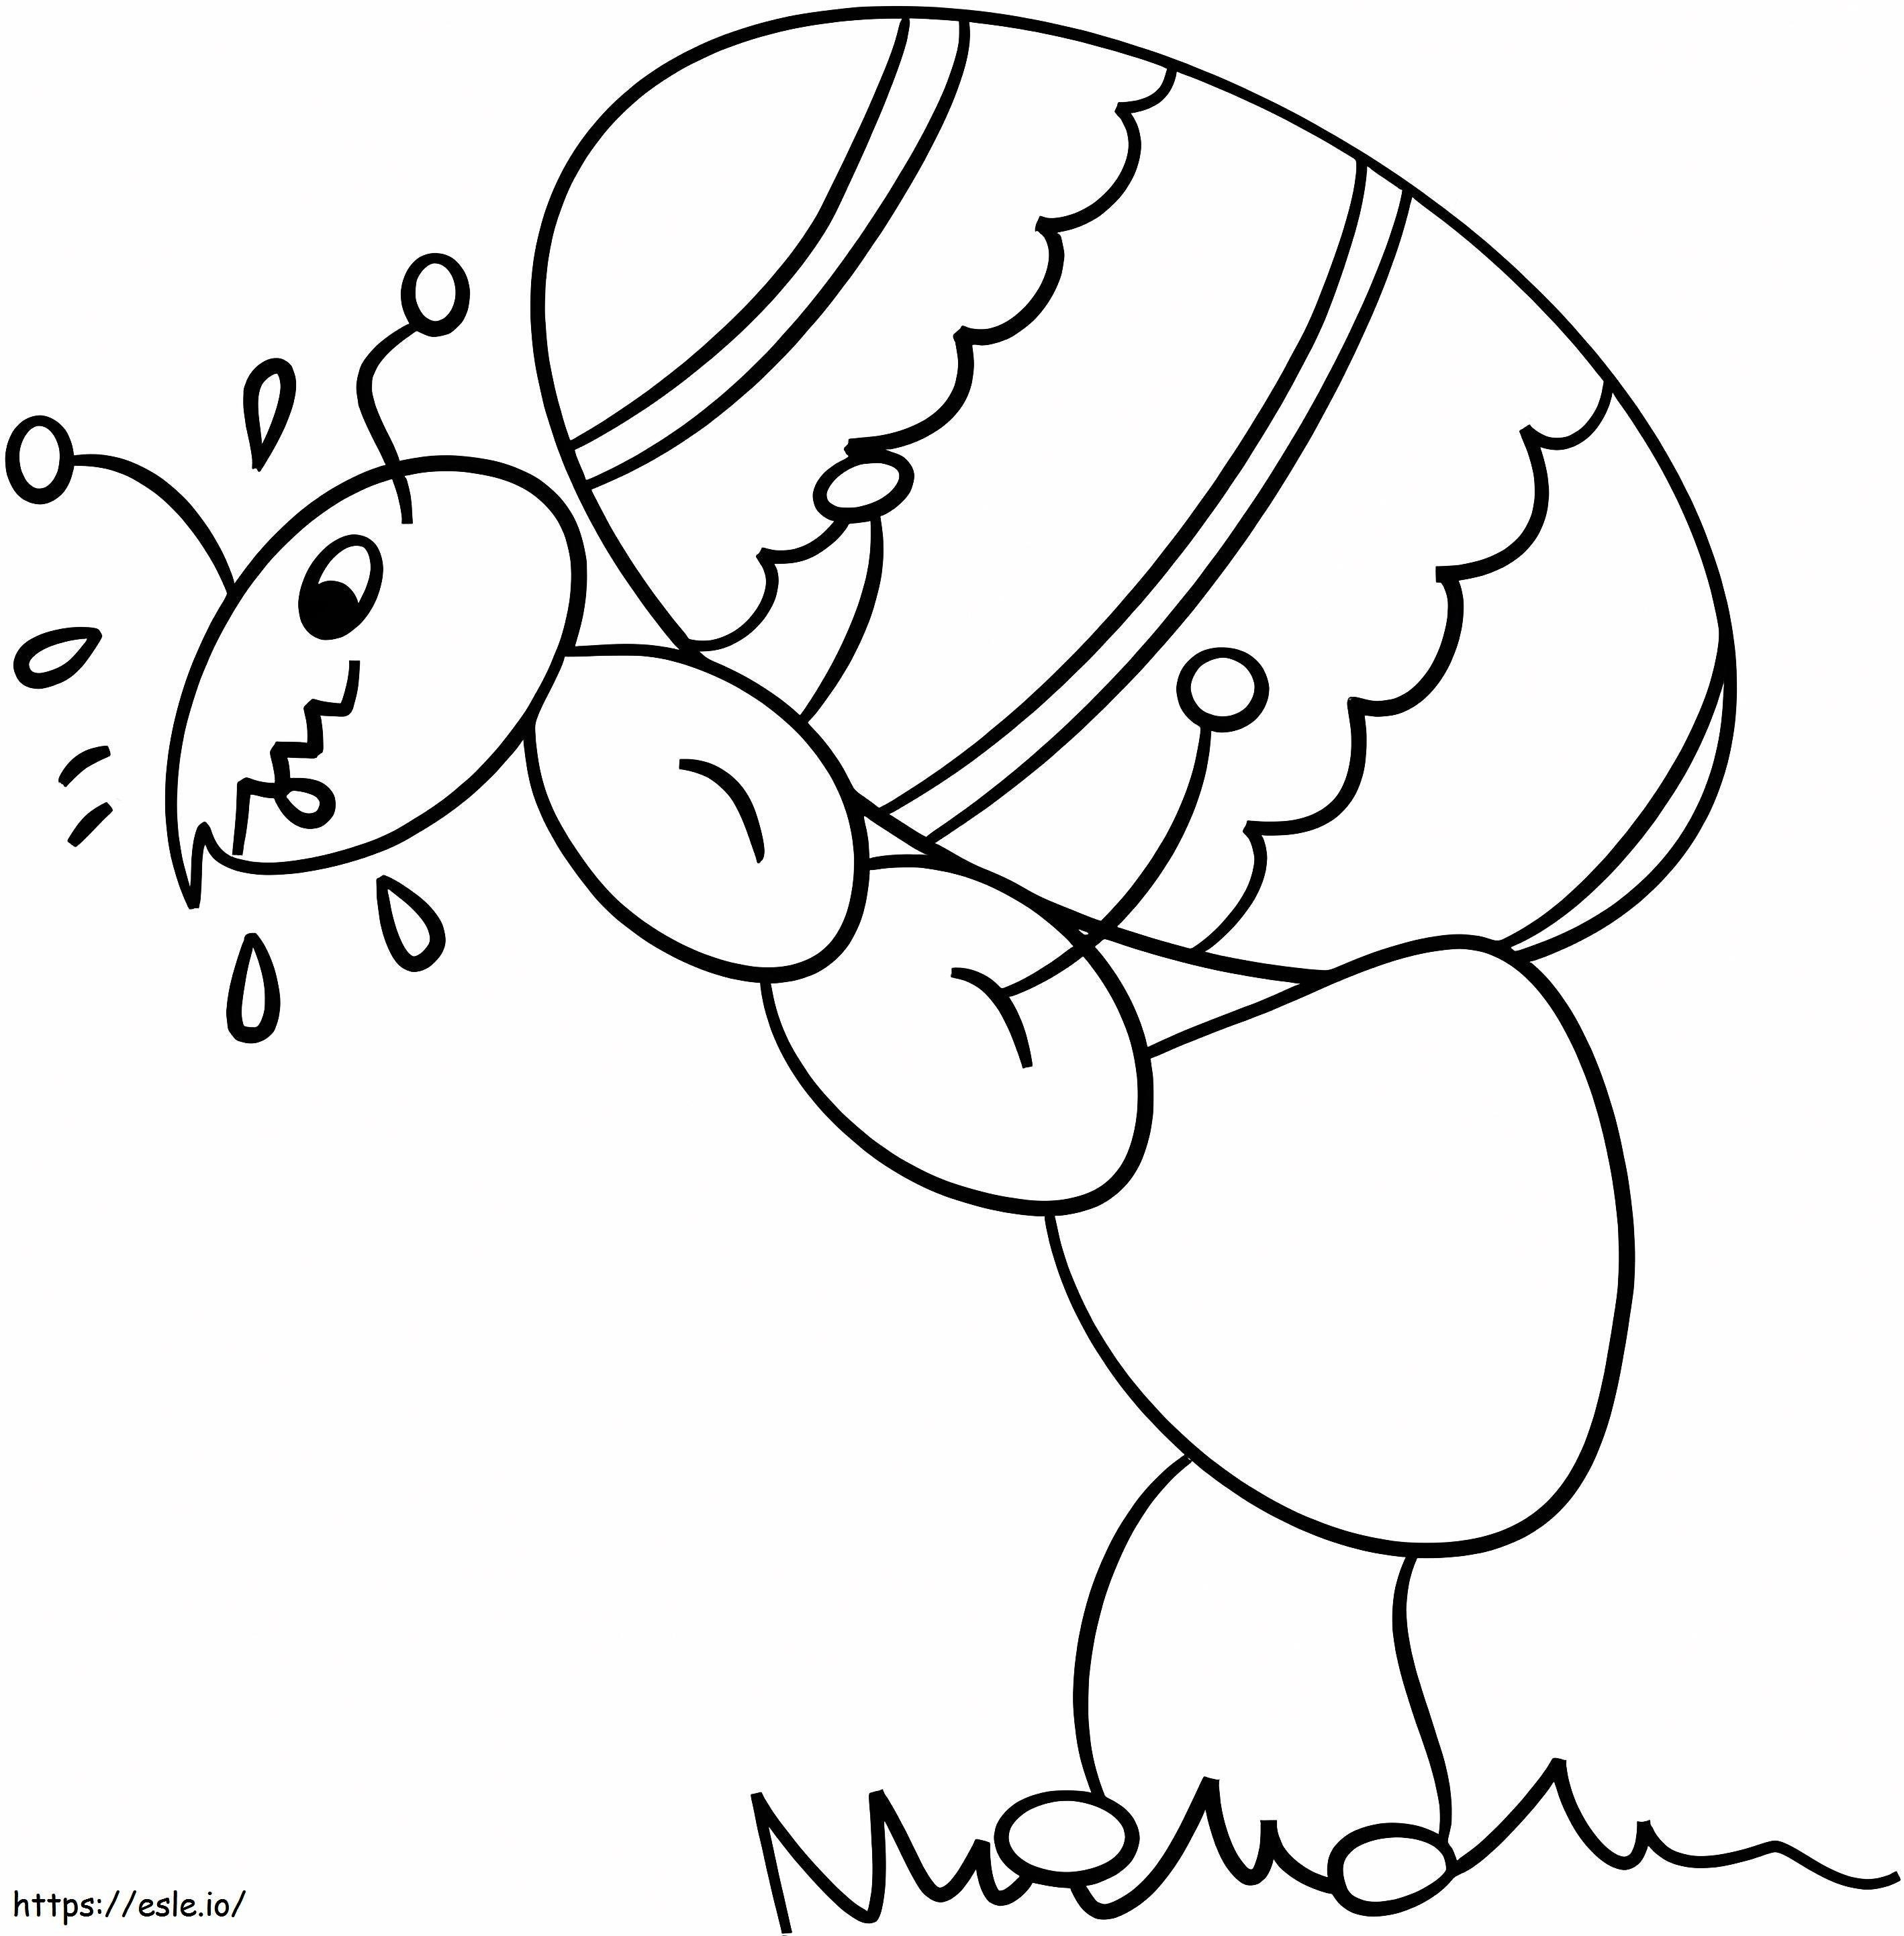 Ant Carrying Easter Egg coloring page